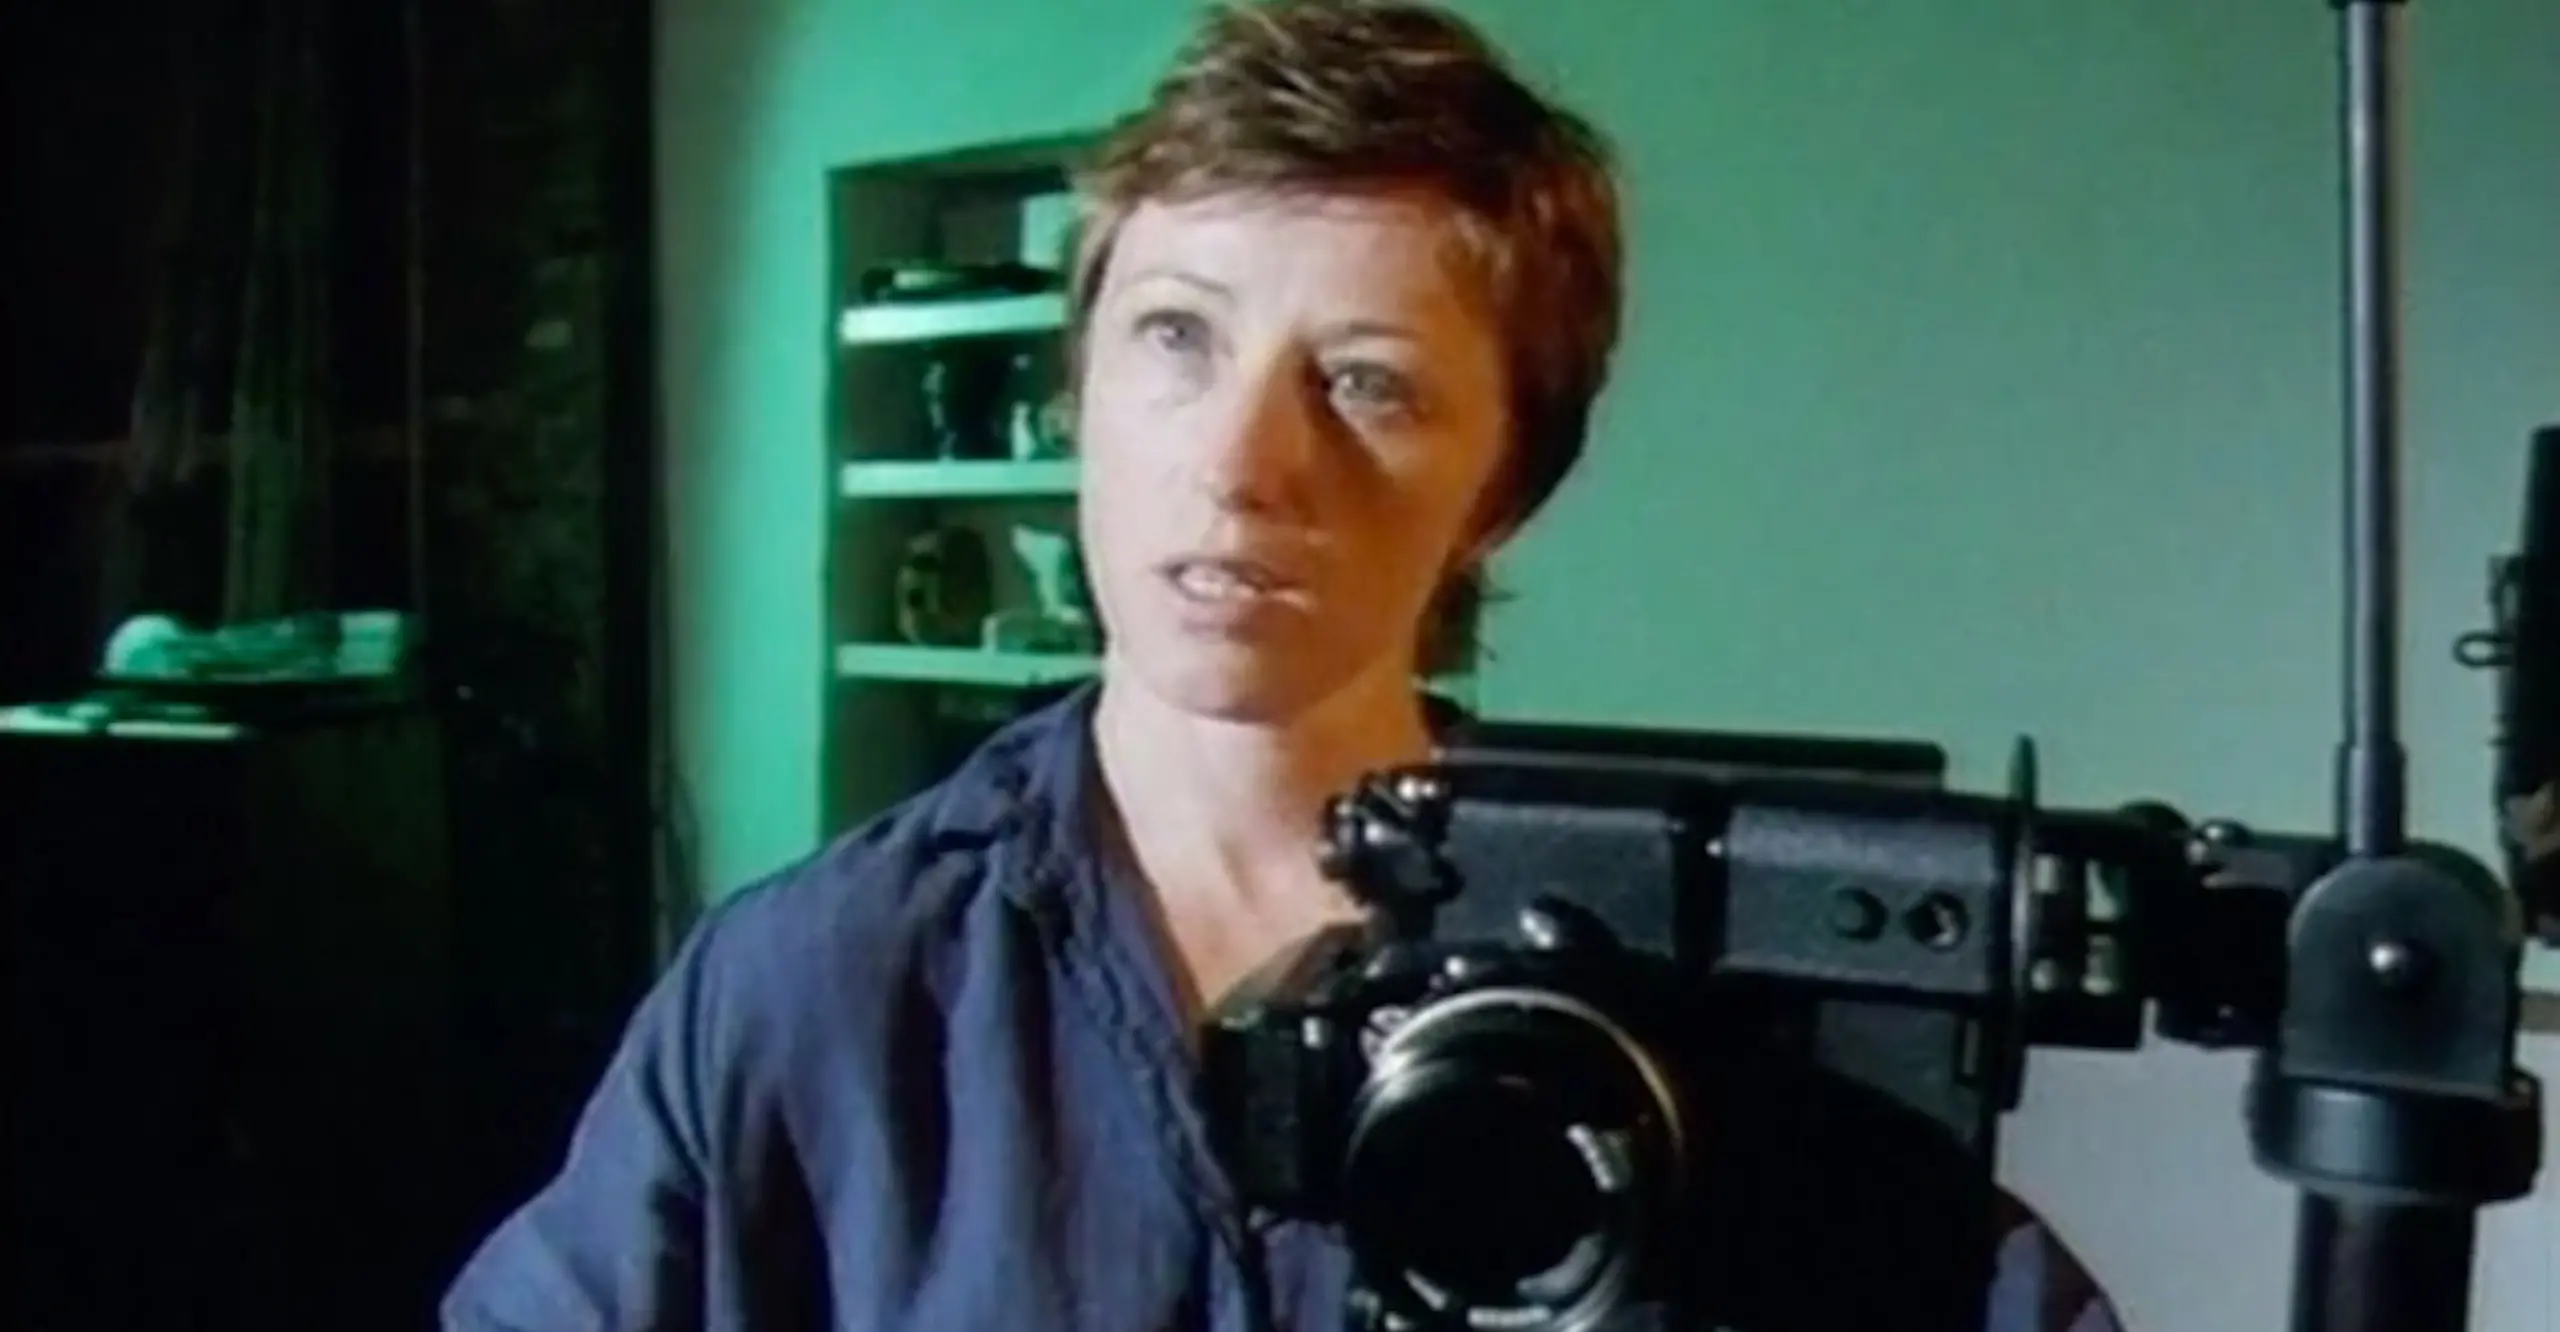 Head and shoulders of a white woman with cropped hair and a camera in the foreground and a green wall behind.